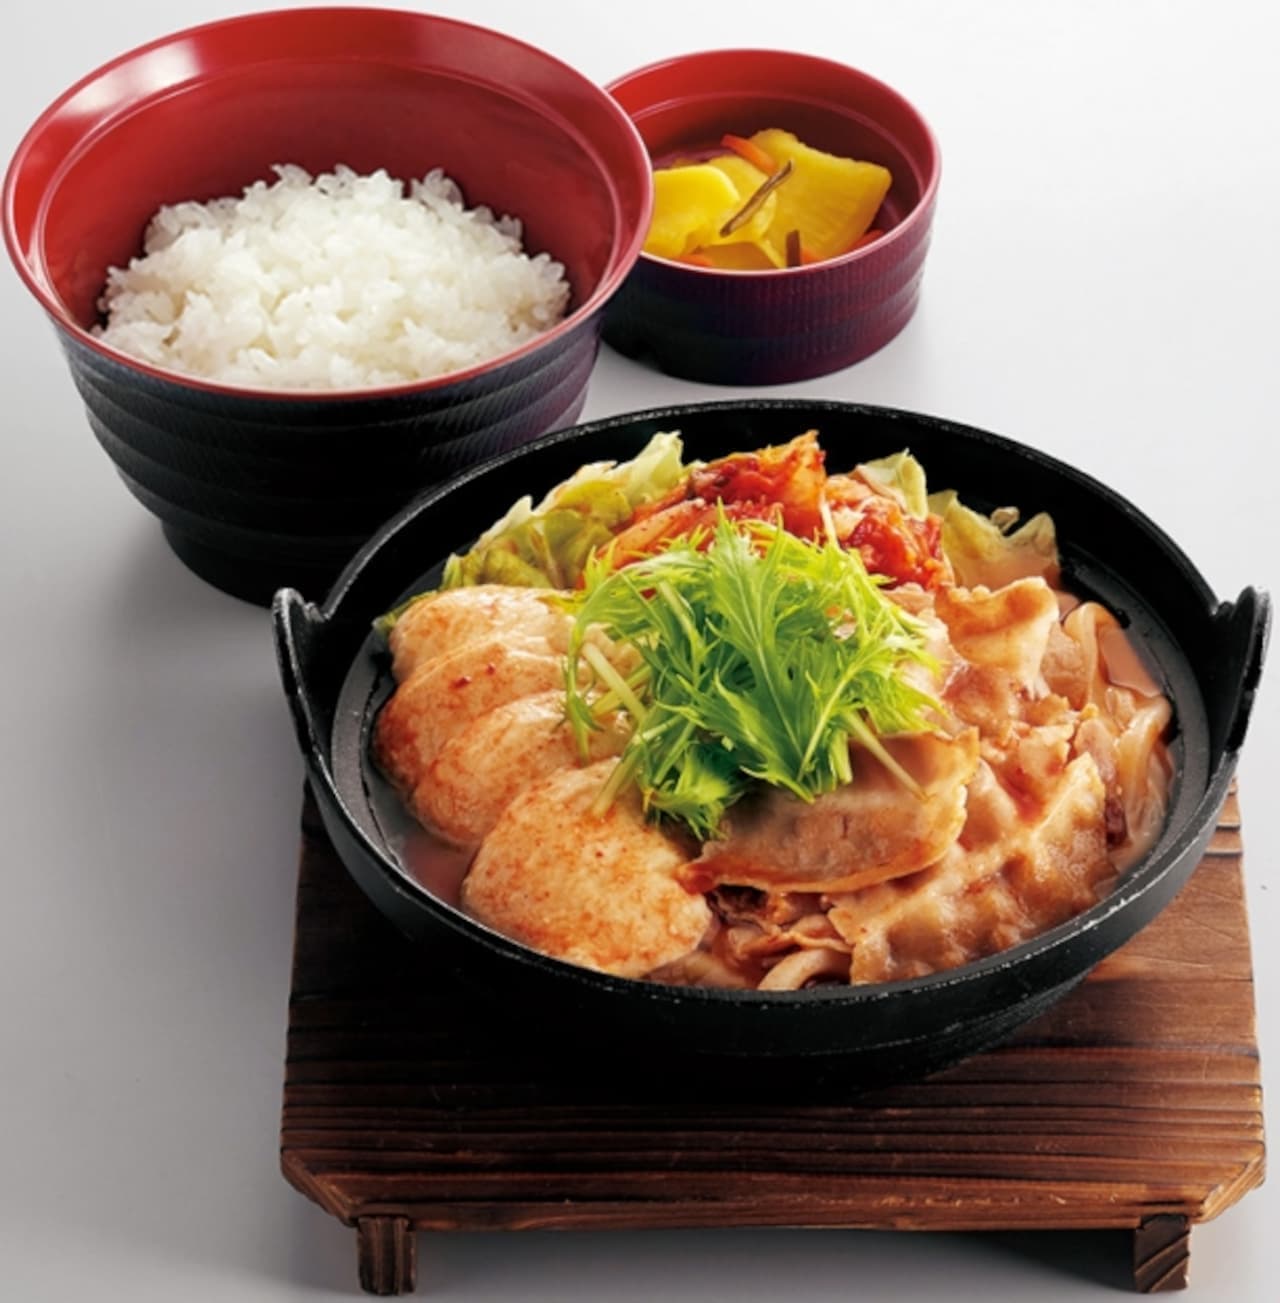 Joyful "Miso Chige Set Meal with Sukui Soy Tofu with Udon Noodles